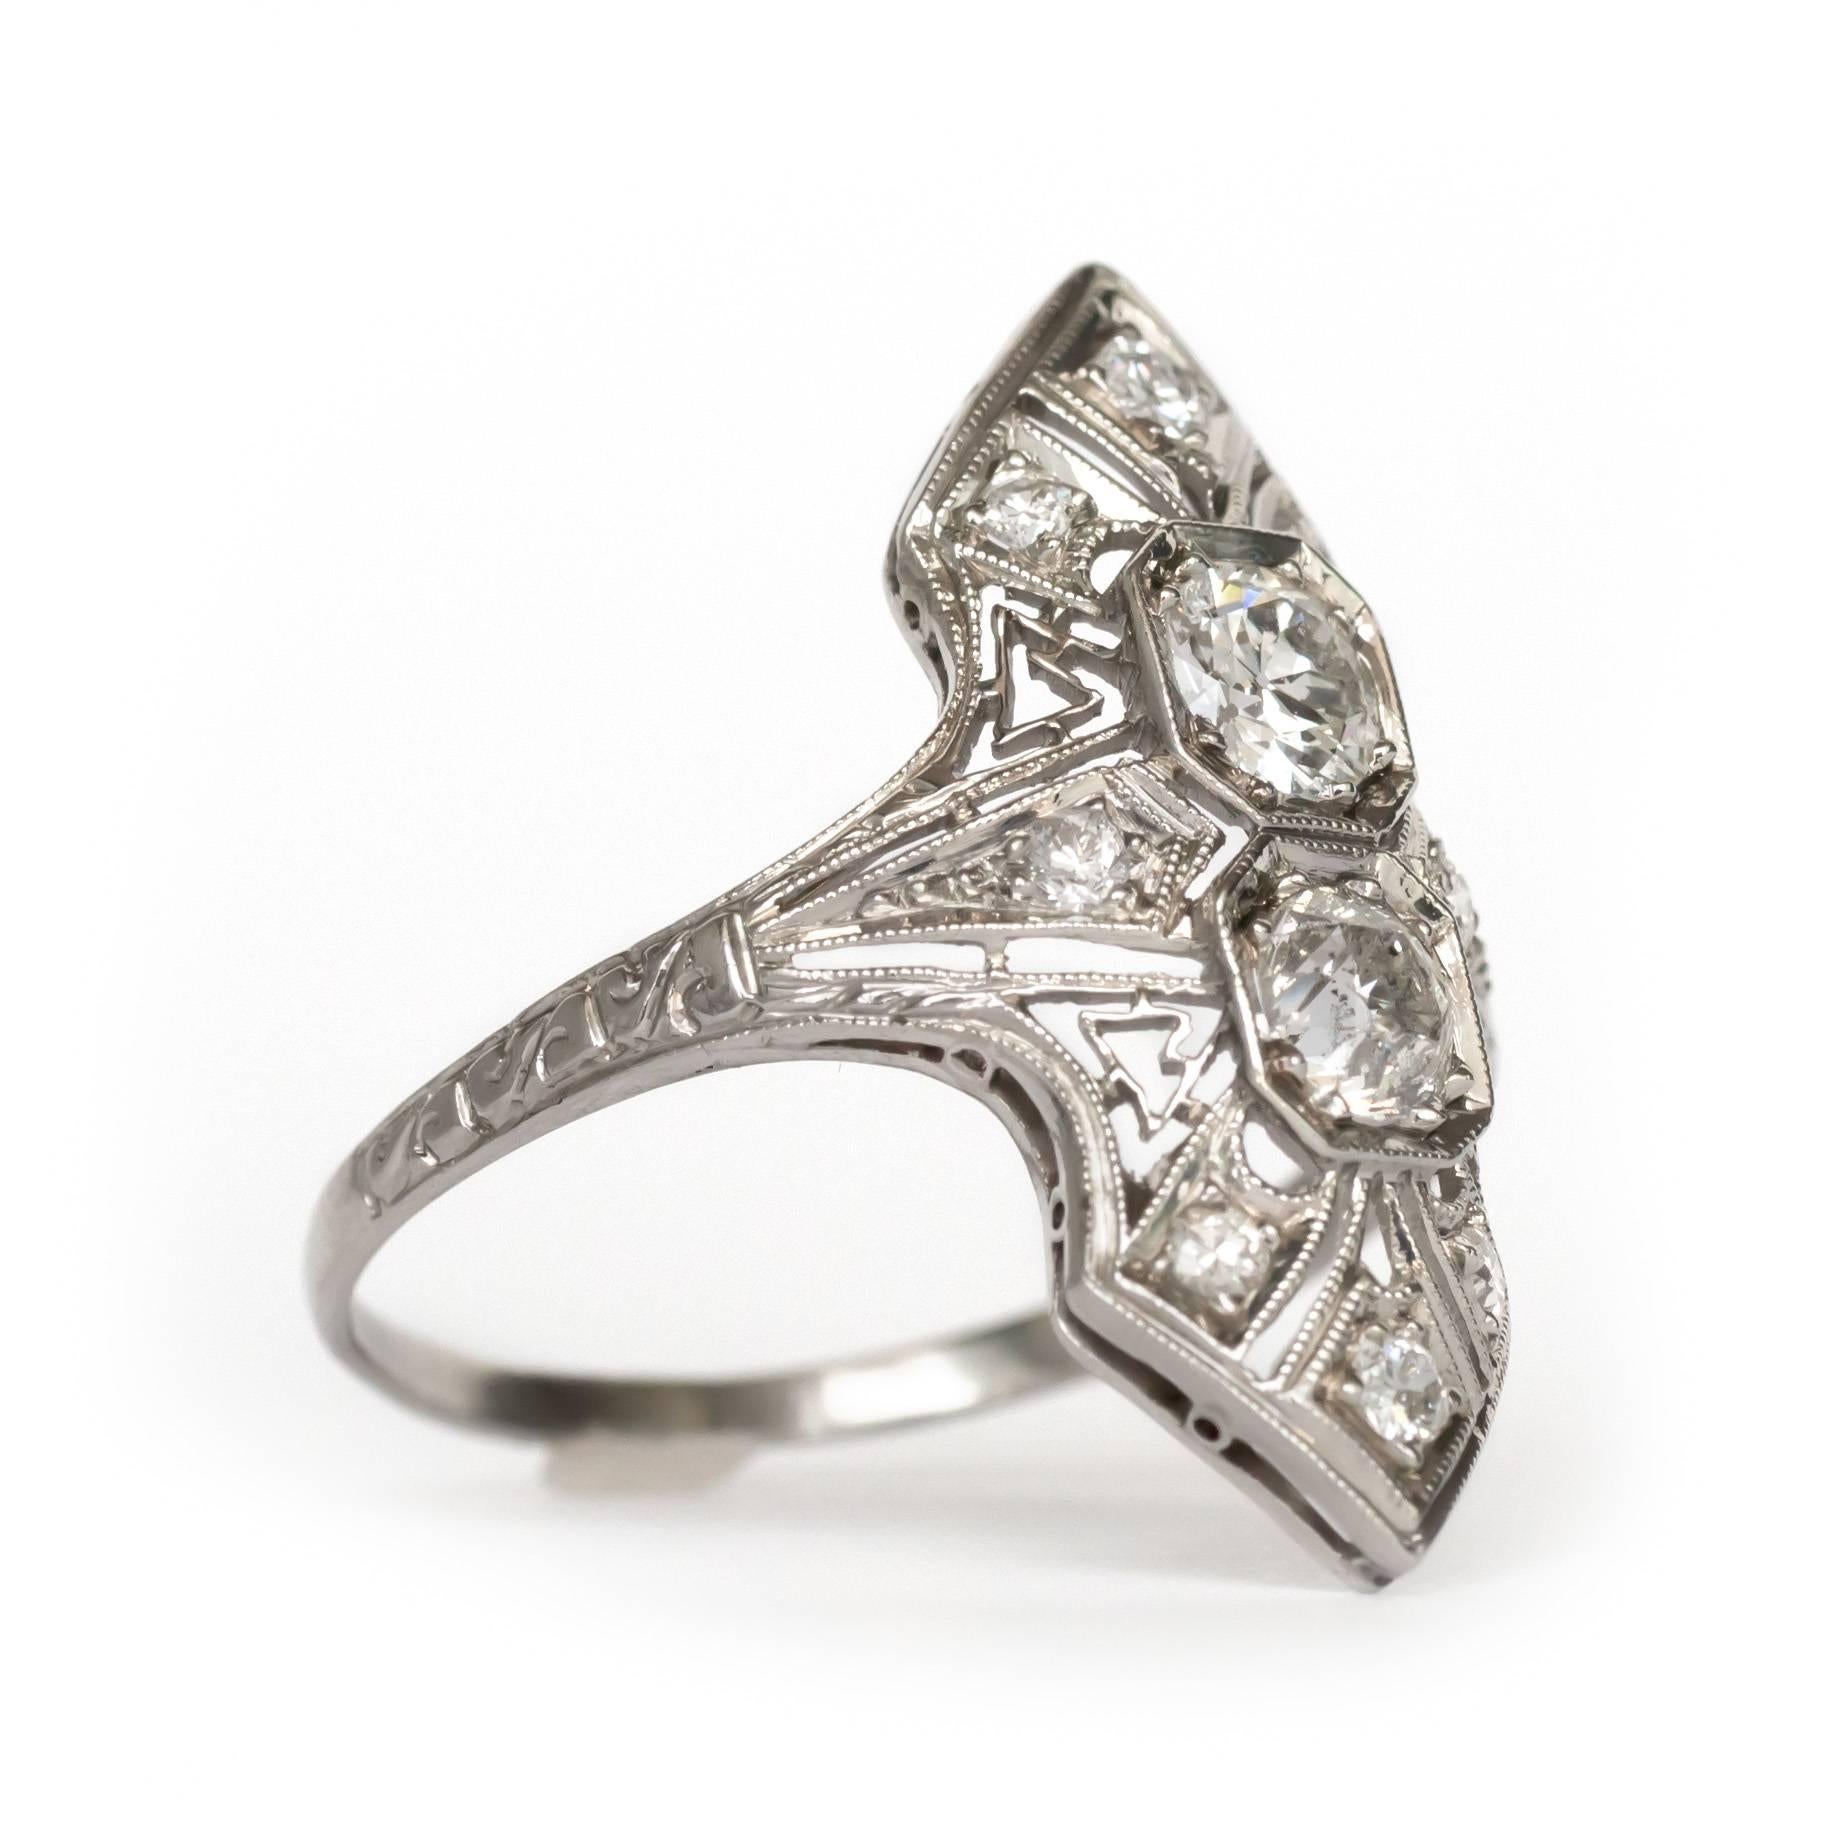 Item Details: 
Ring Size: 9.25
Metal Type: Platinum 
Weight: 4.4 grams

Center Diamond Details
Shape: Old European Cut
Carat Weight: .75 carat total weight
Color: F
Clarity: I1

Side Stone Details: 
Shape: Antique Single Cut 
Total Carat Weight: .25